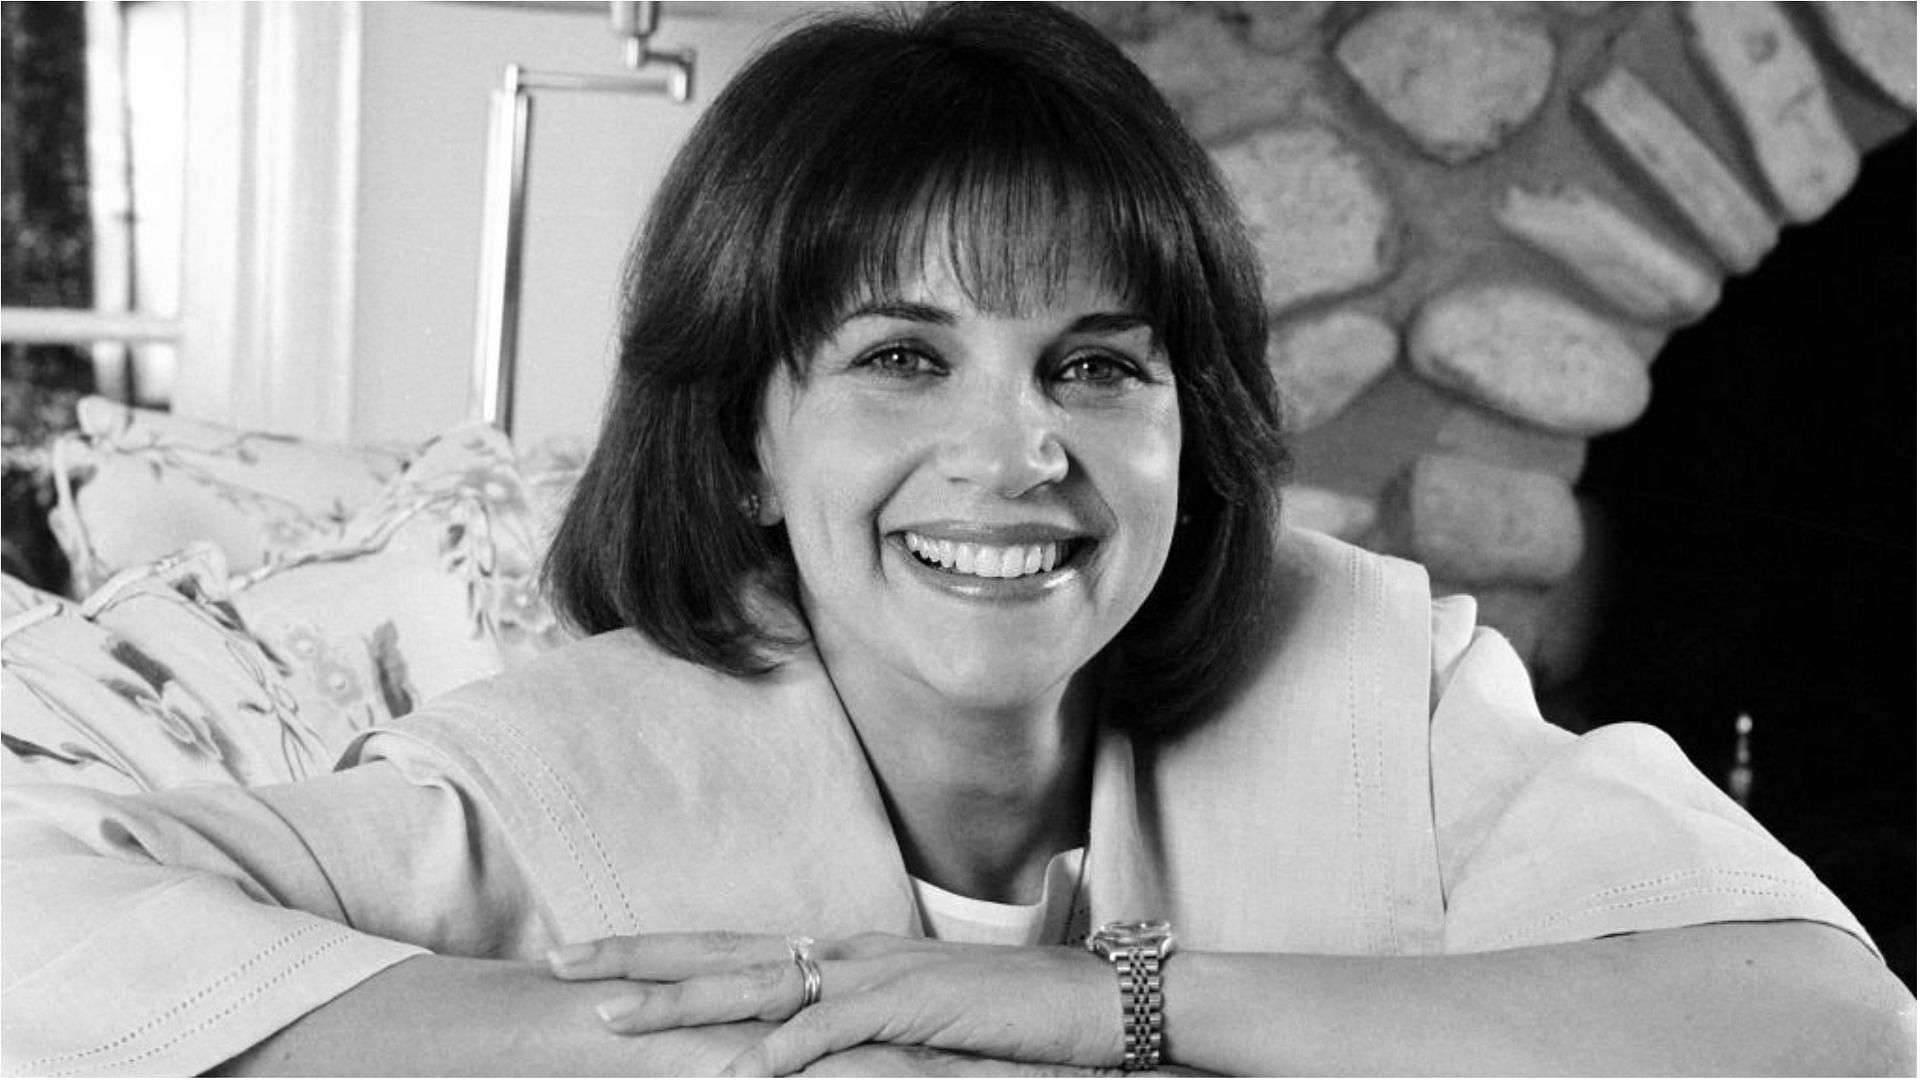 Cindy Williams recently passed away at the age of 75 (Image via Bob Riha, Jr./Getty Images)